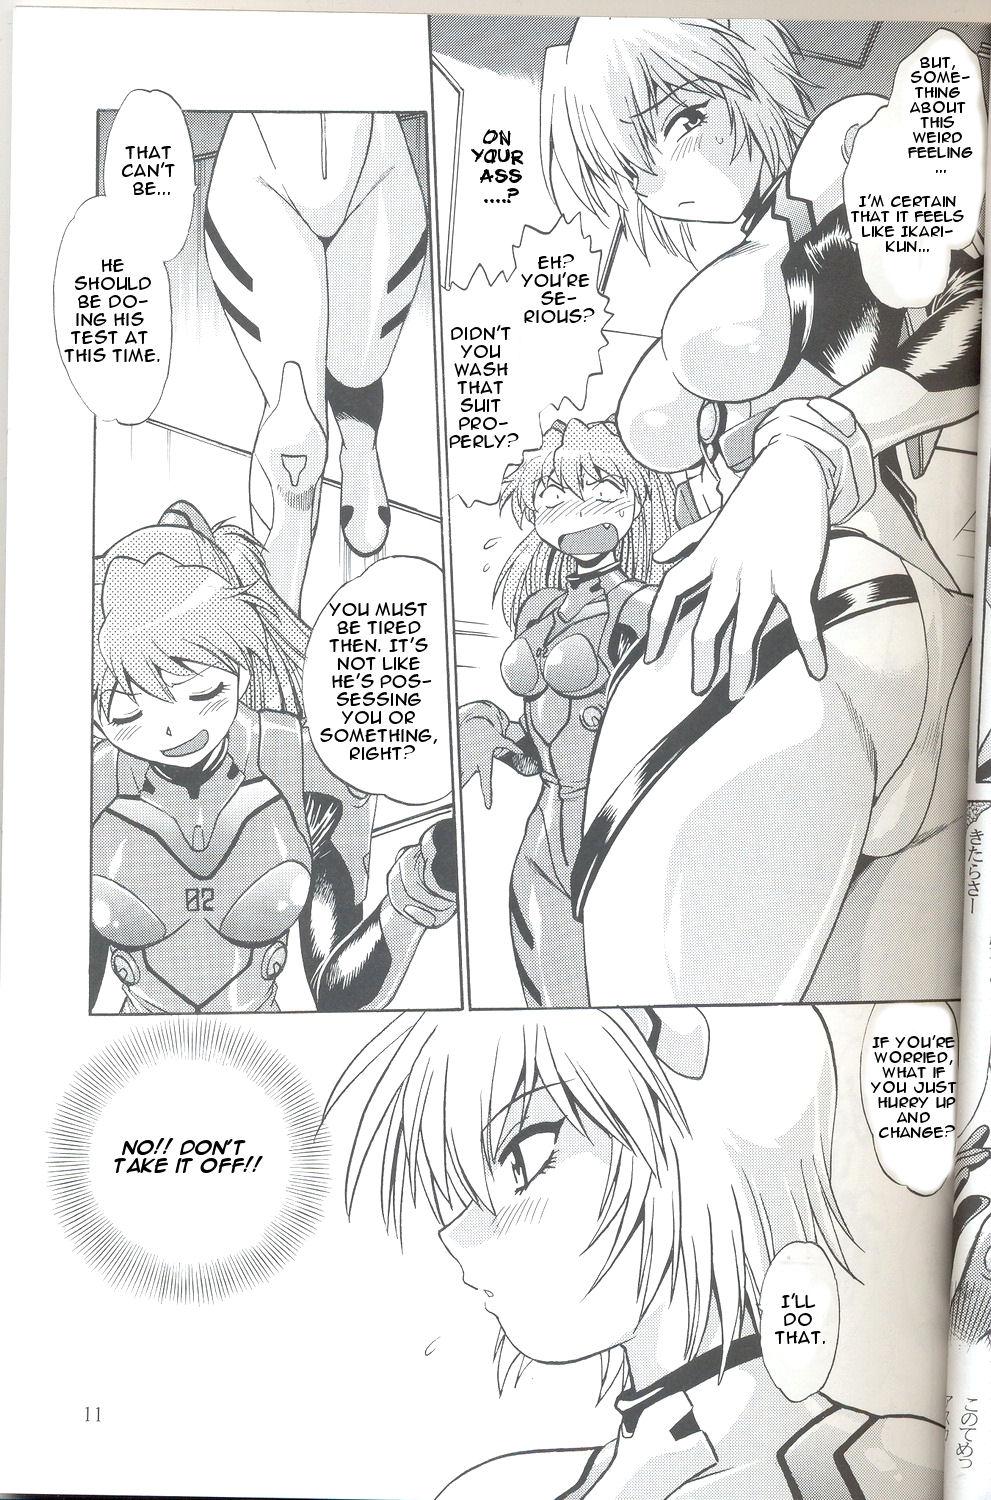 Whipping Plug Suit Fetish Vol.6 - Neon genesis evangelion Hairypussy - Page 11